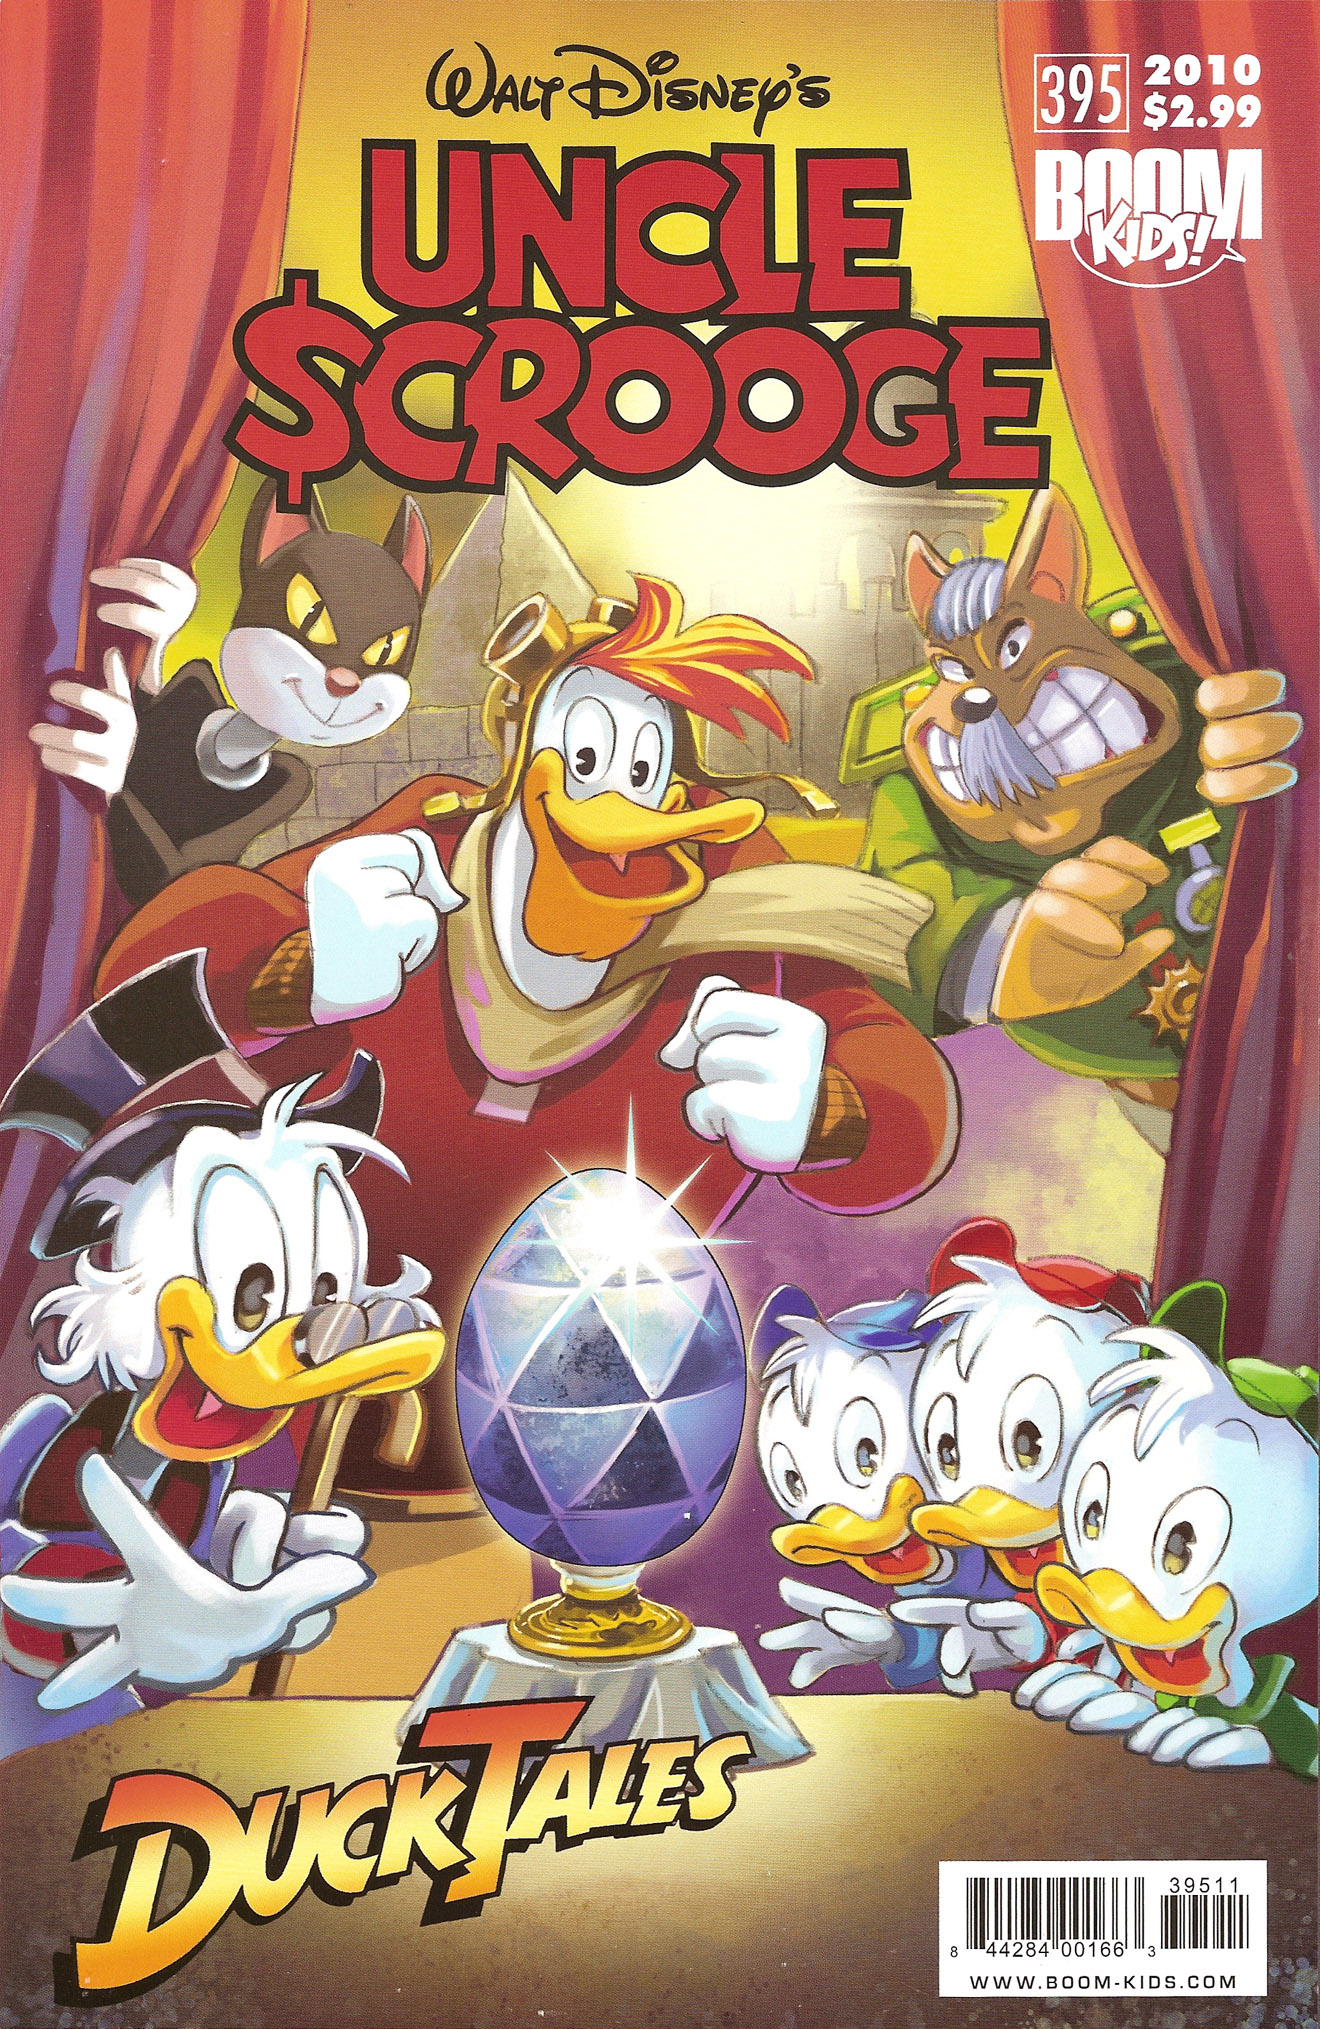 Read online Uncle Scrooge (1953) comic -  Issue #395 - 1